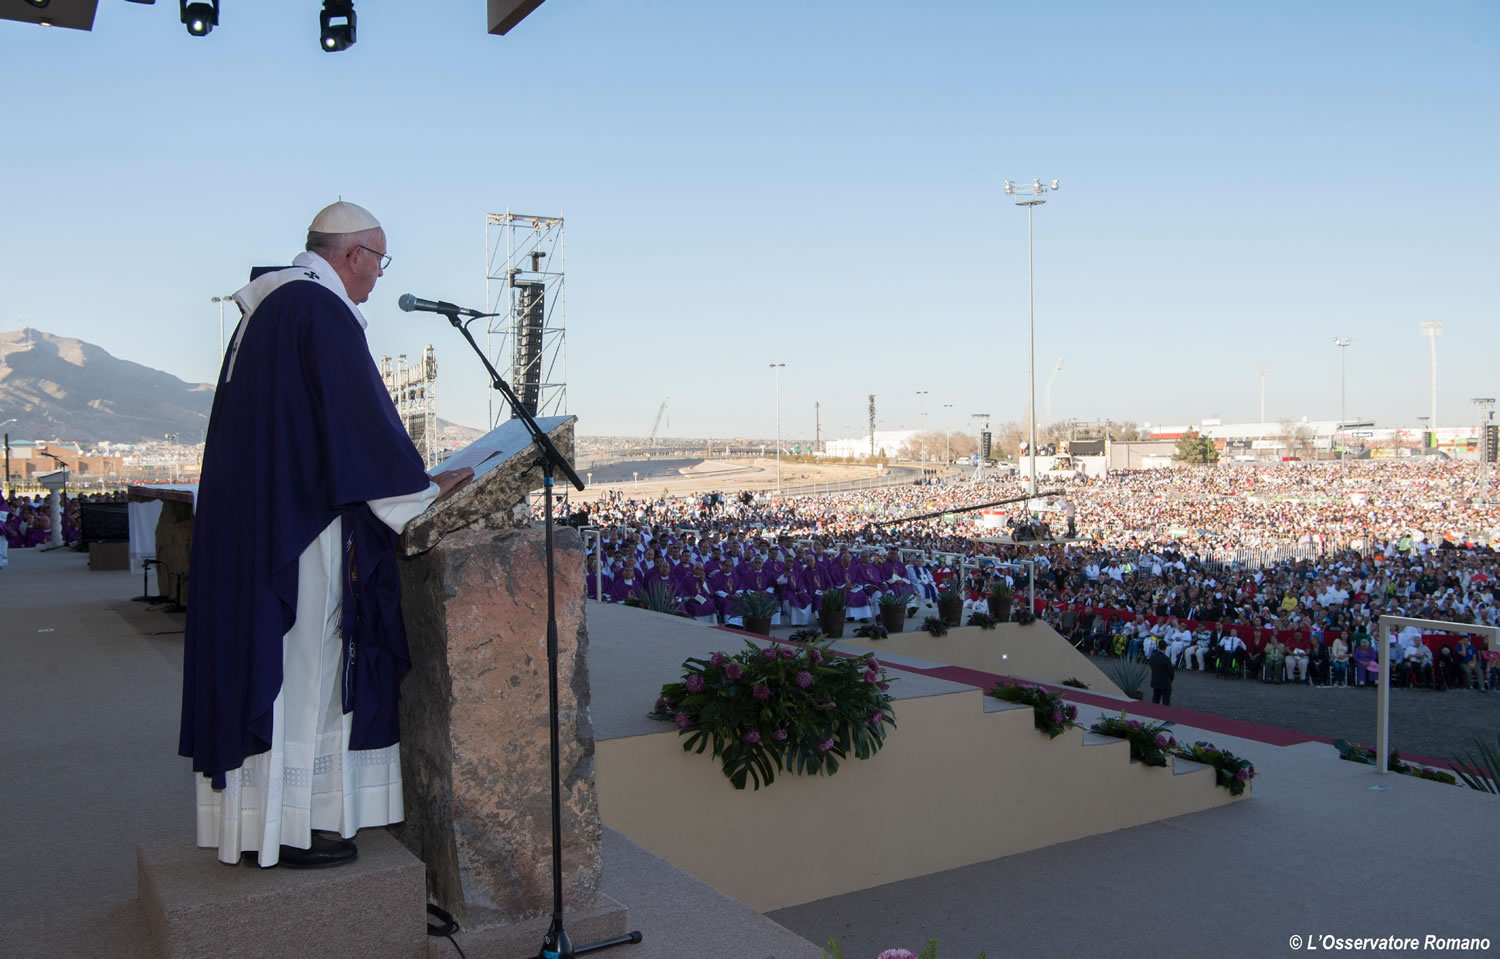 Pope Francis speaks during a mass he celebrated in Ciudad Juarez, Mexico, Wednesday, Feb. 17, 2016. Francis is on his way back to Italy after a five-day visit in Mexico.